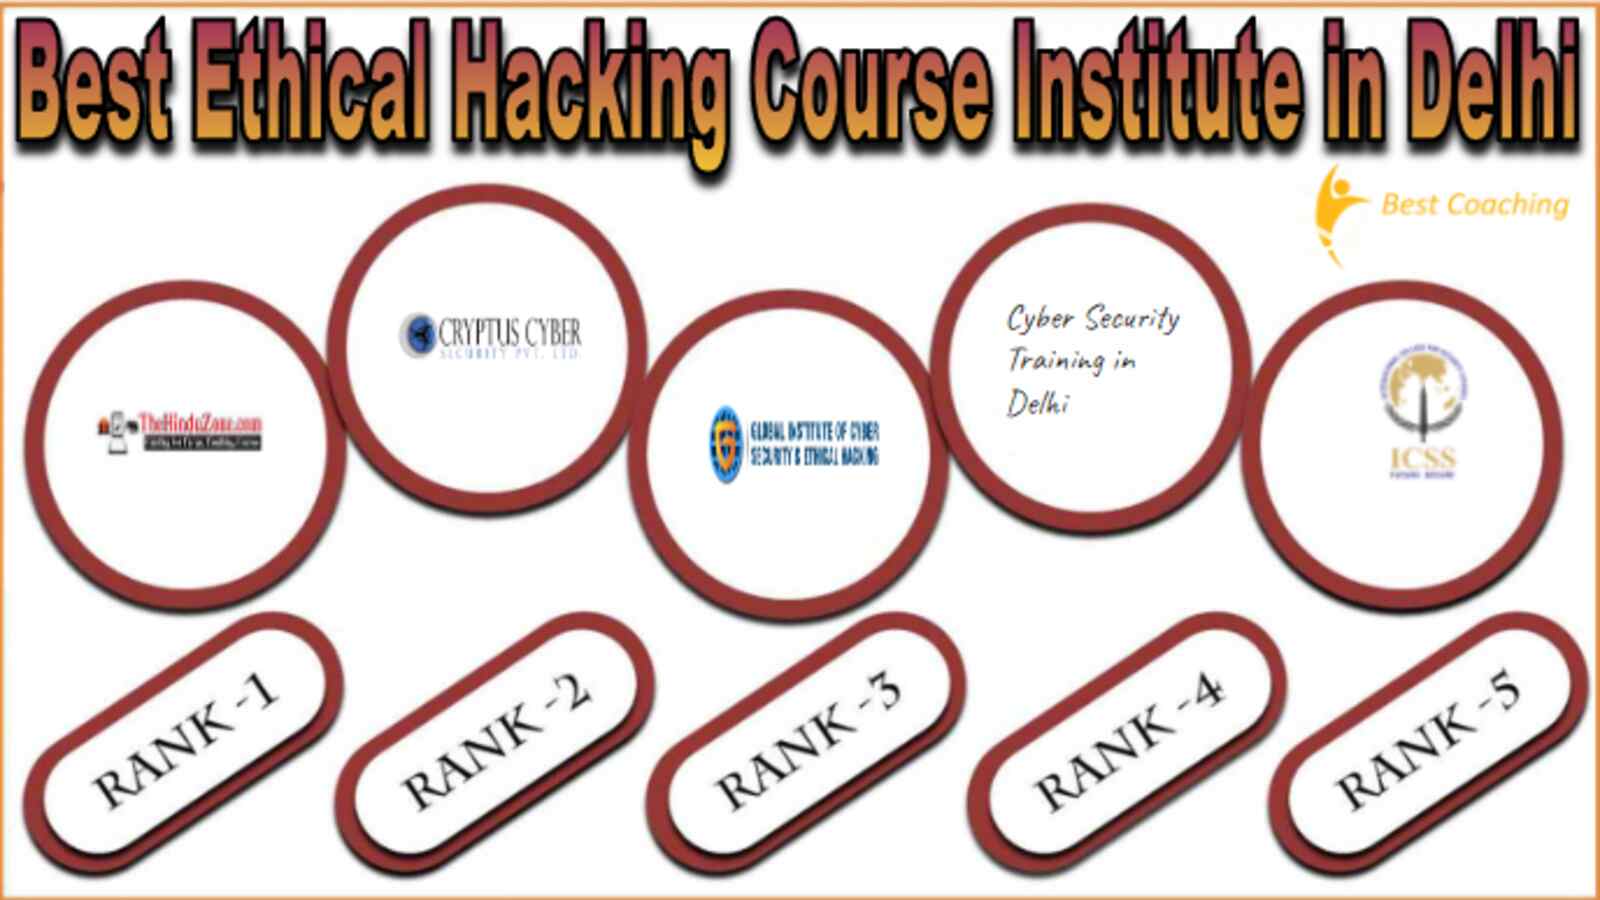 Best Ethical Hacking Course Institute in Delhi